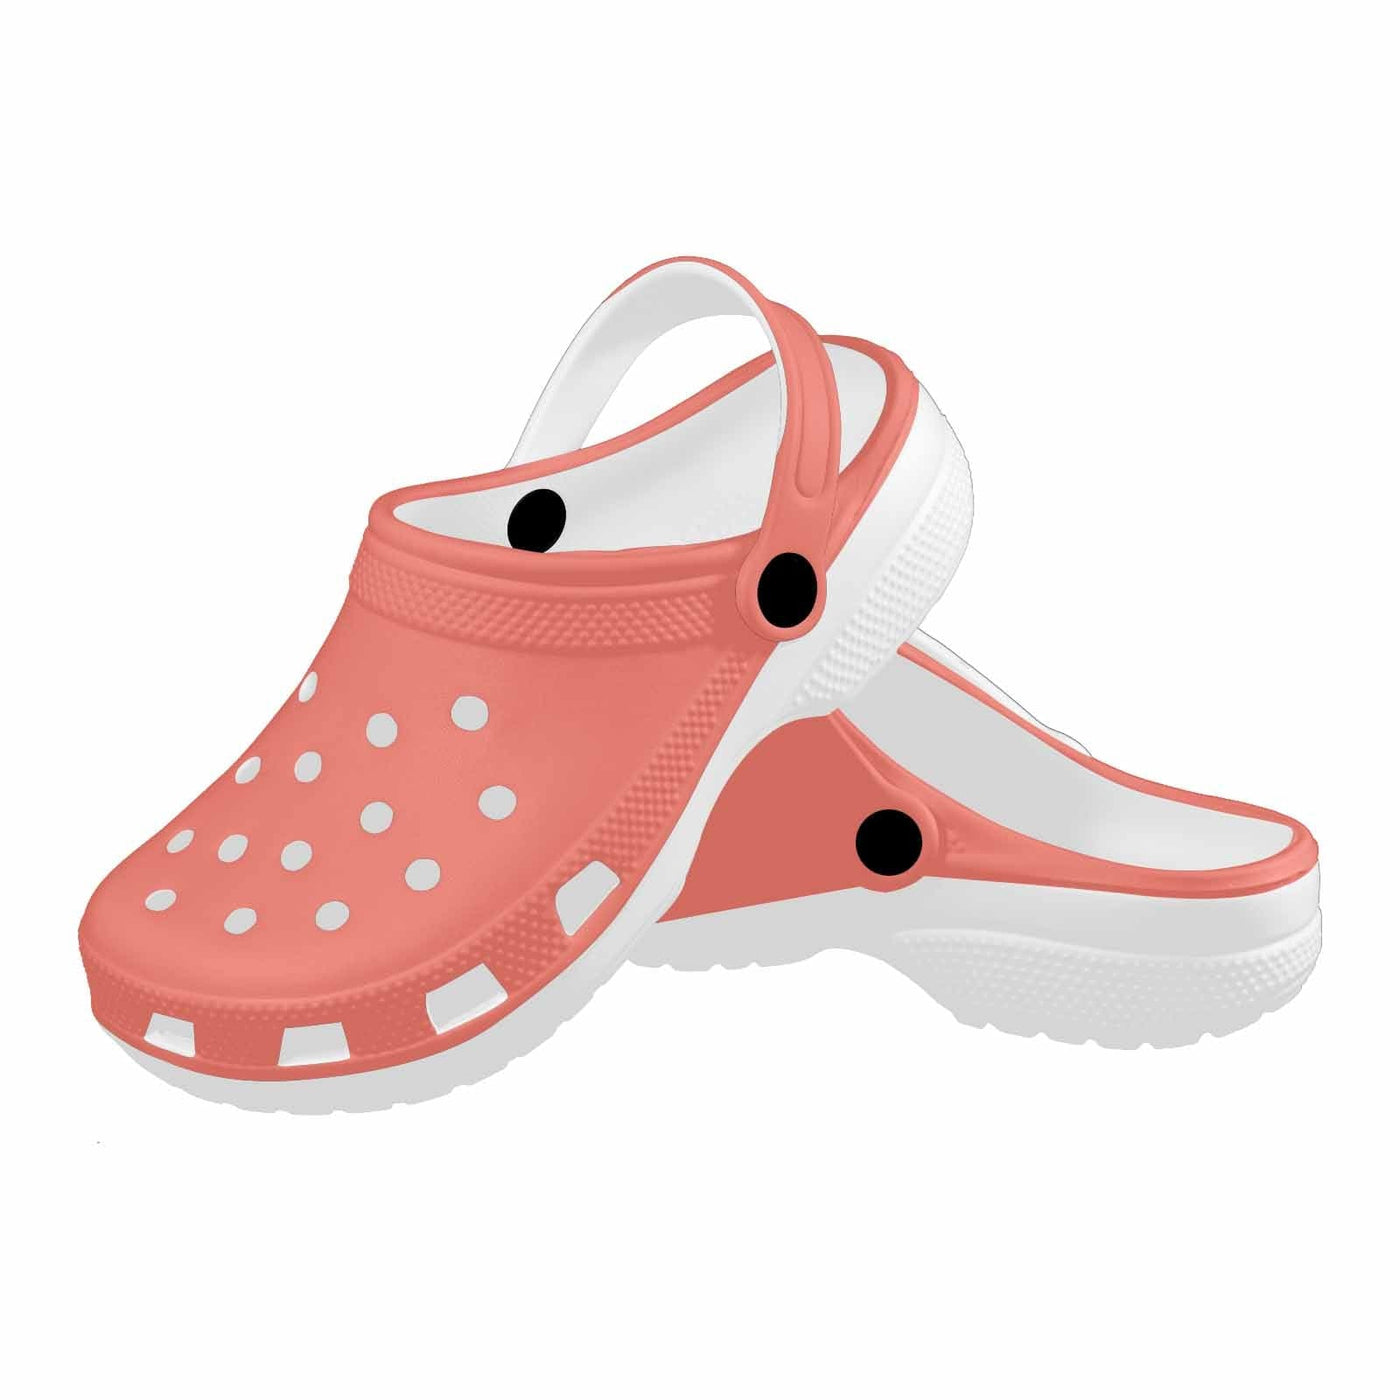 Salmon Red Adult Clogs - Unisex | Clogs | Adults